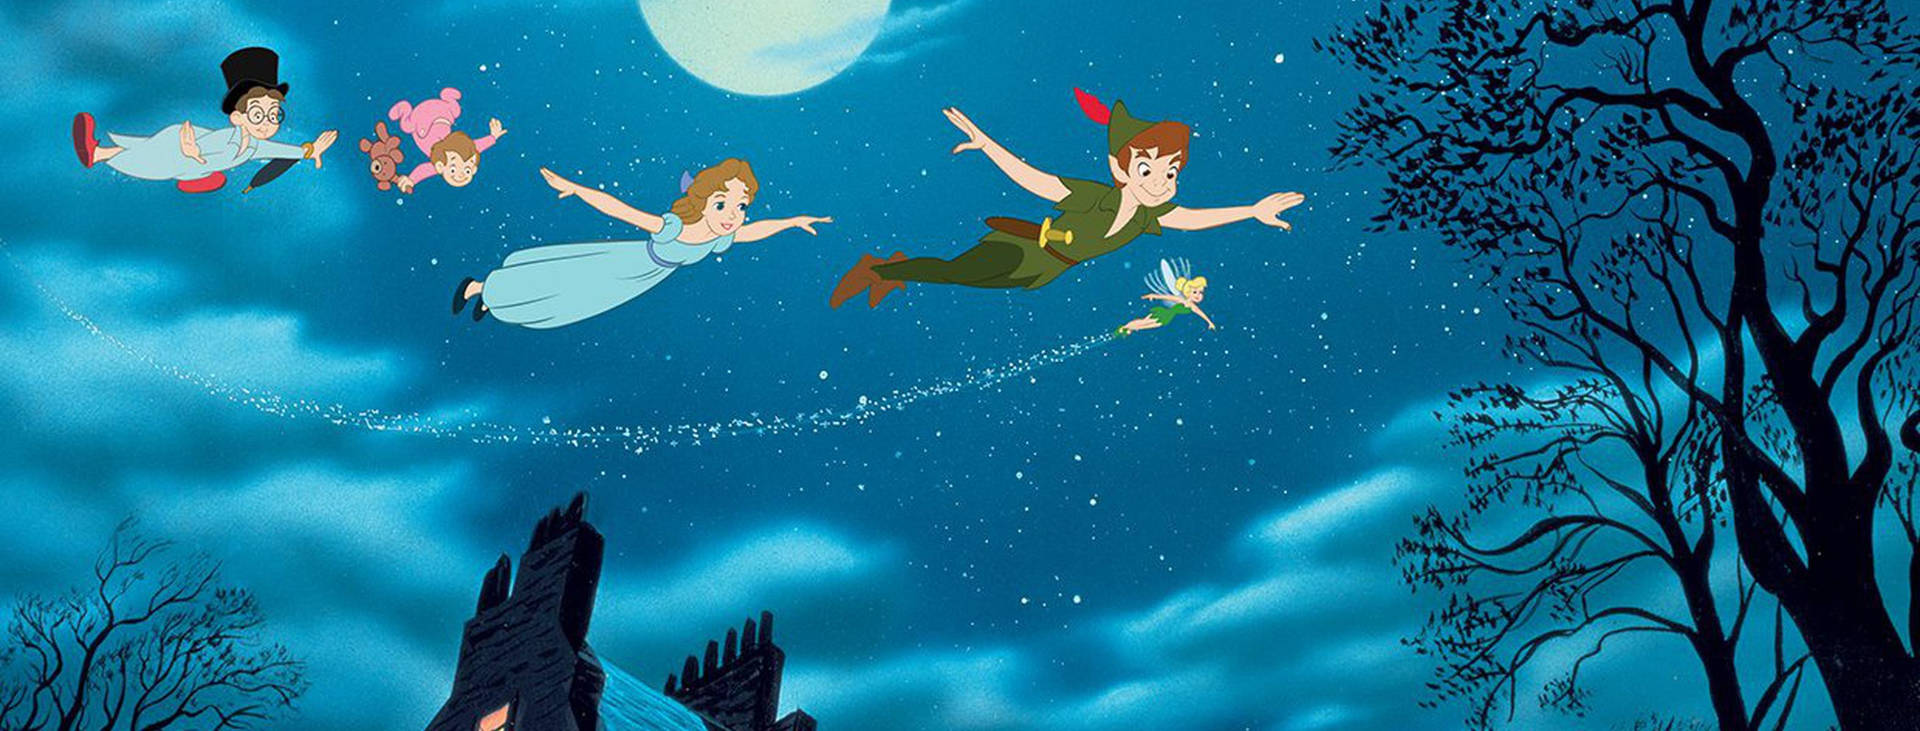 Tinker Bell With Peter Pan Wallpaper